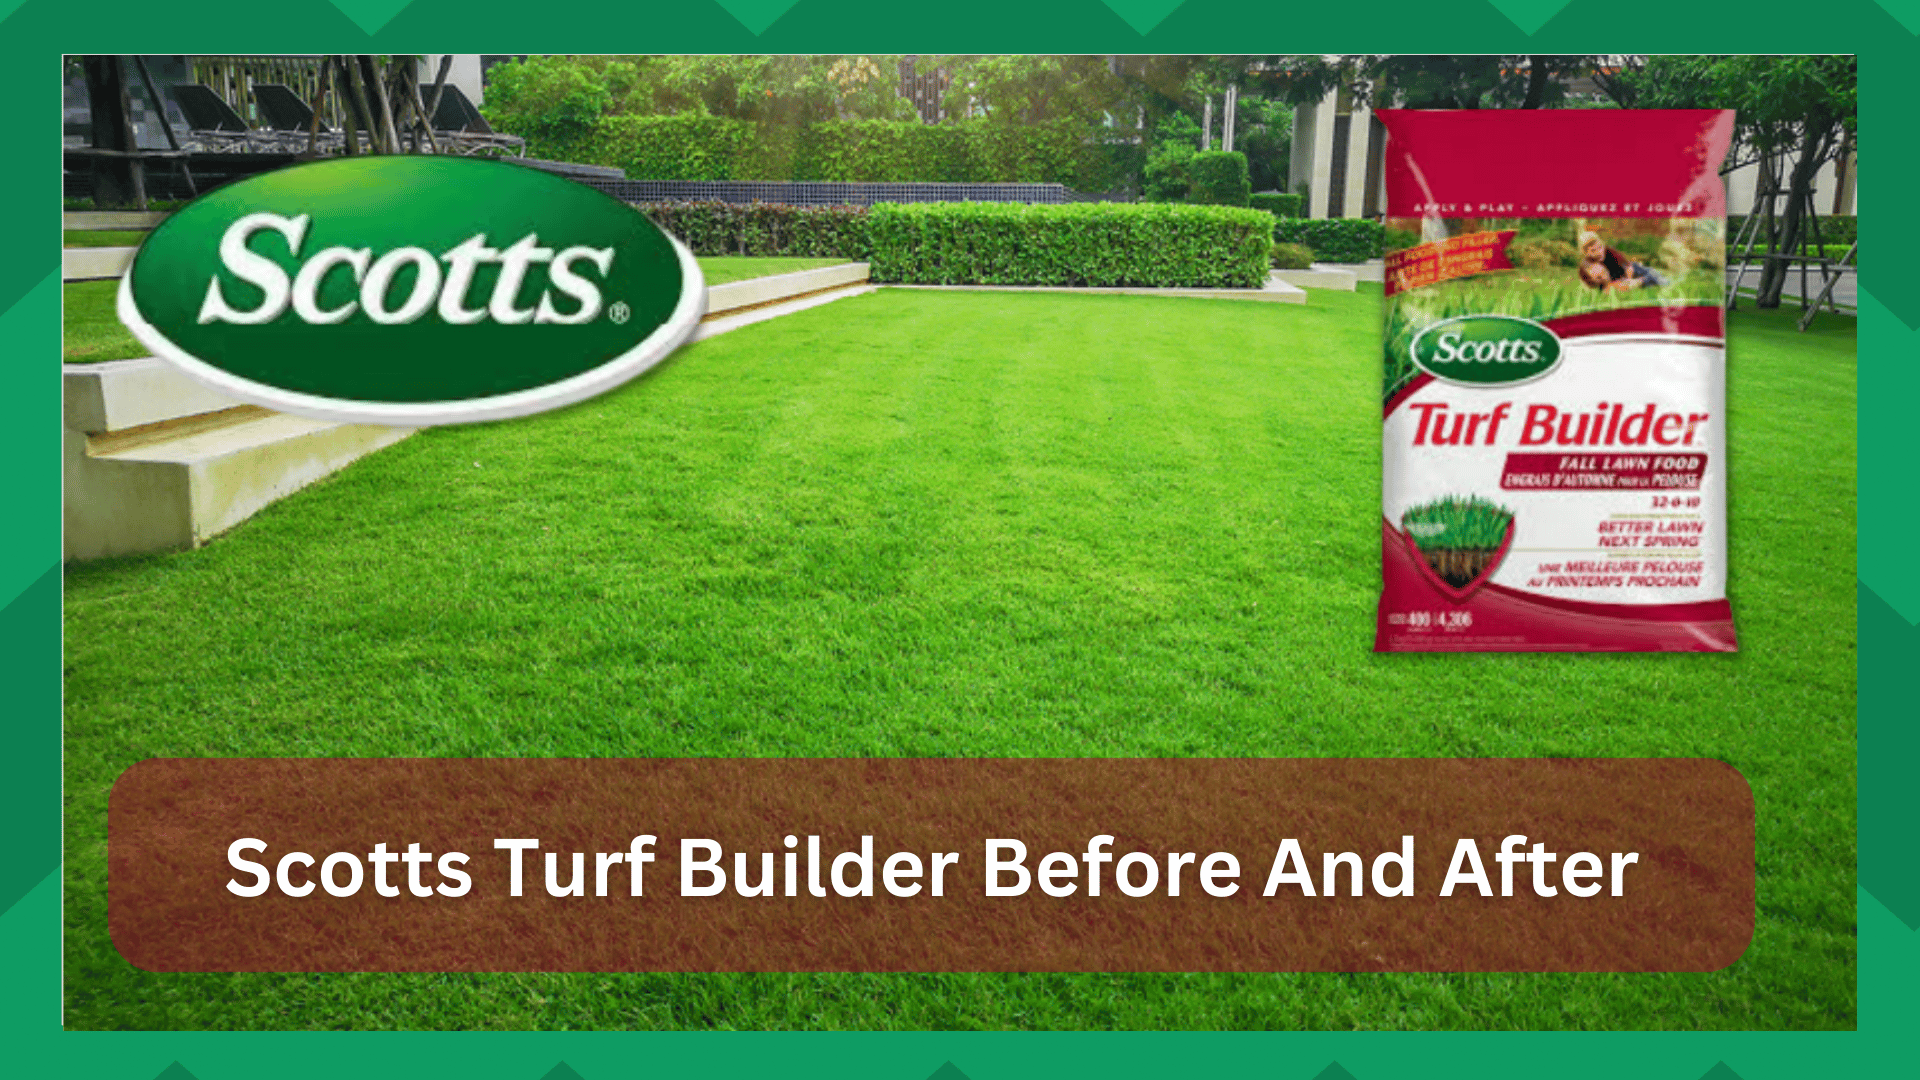 Scotts Turf Builder Before And After